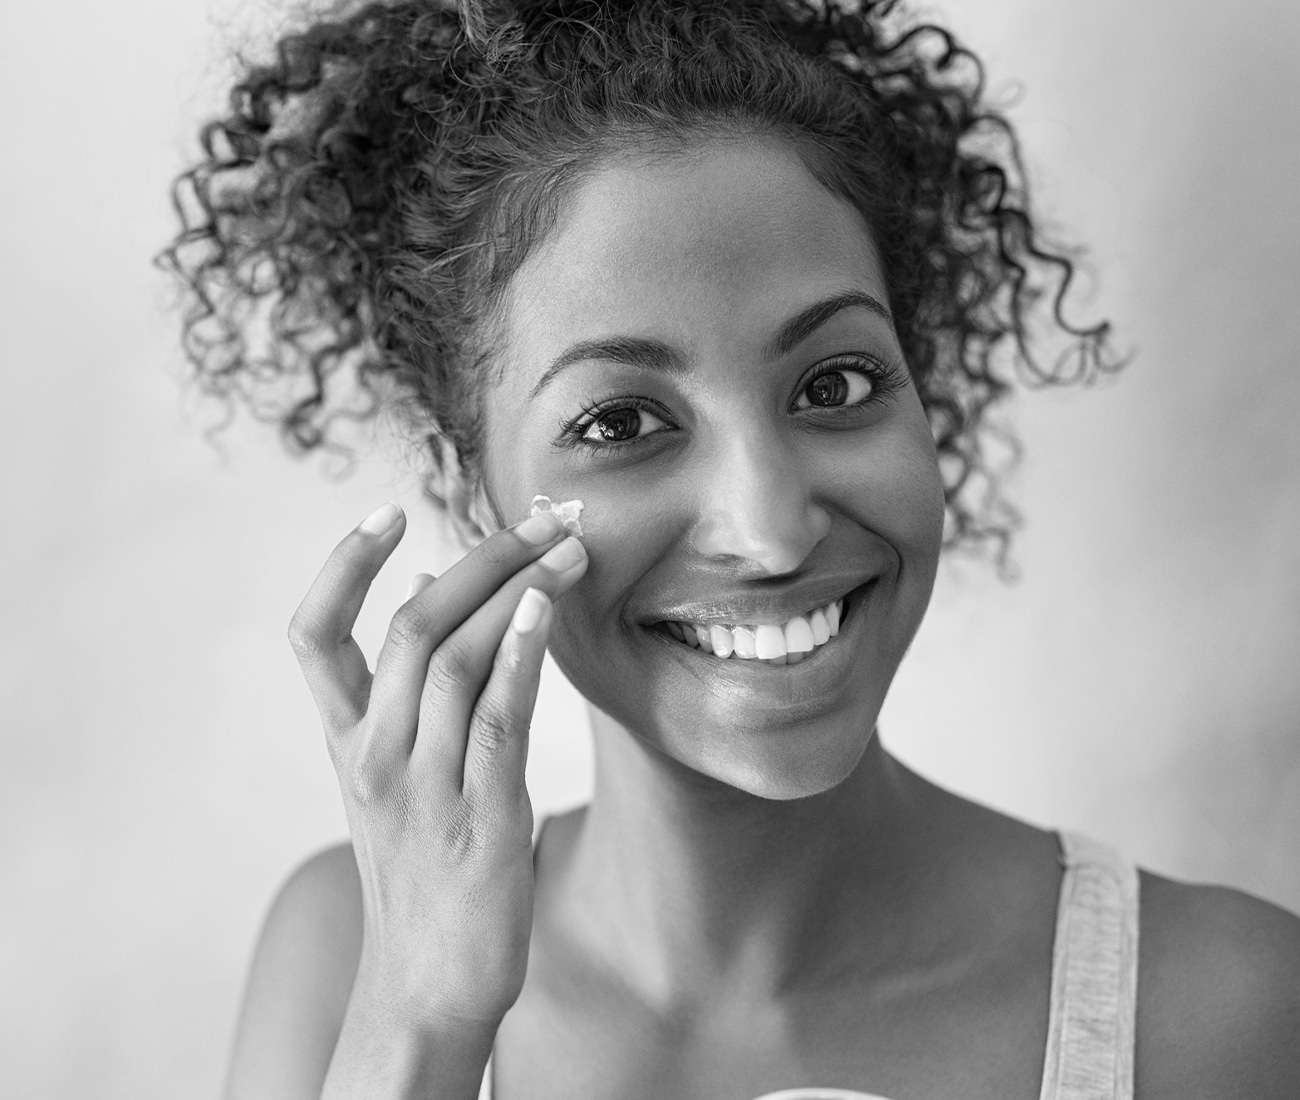 Woman Putting Facial Cream On Face, Black And White Photo